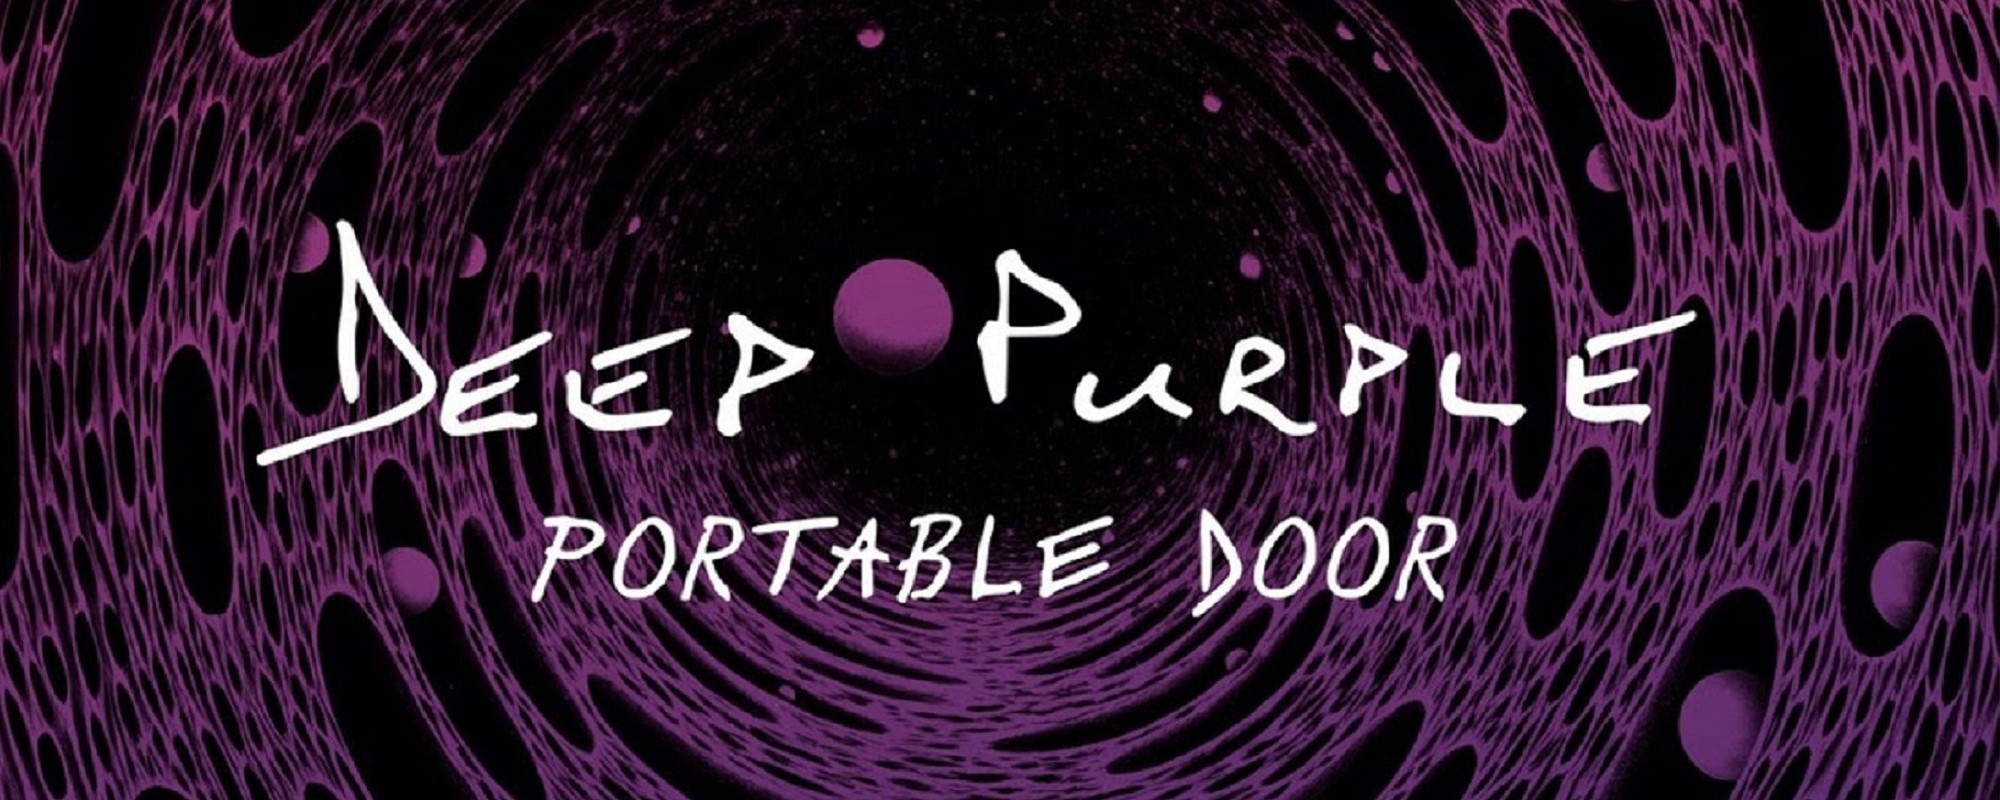 Deep Purple Debuts “Portable Door,” Lead Single from Upcoming Album, ‘=1’; Watch Music Video for New Tune